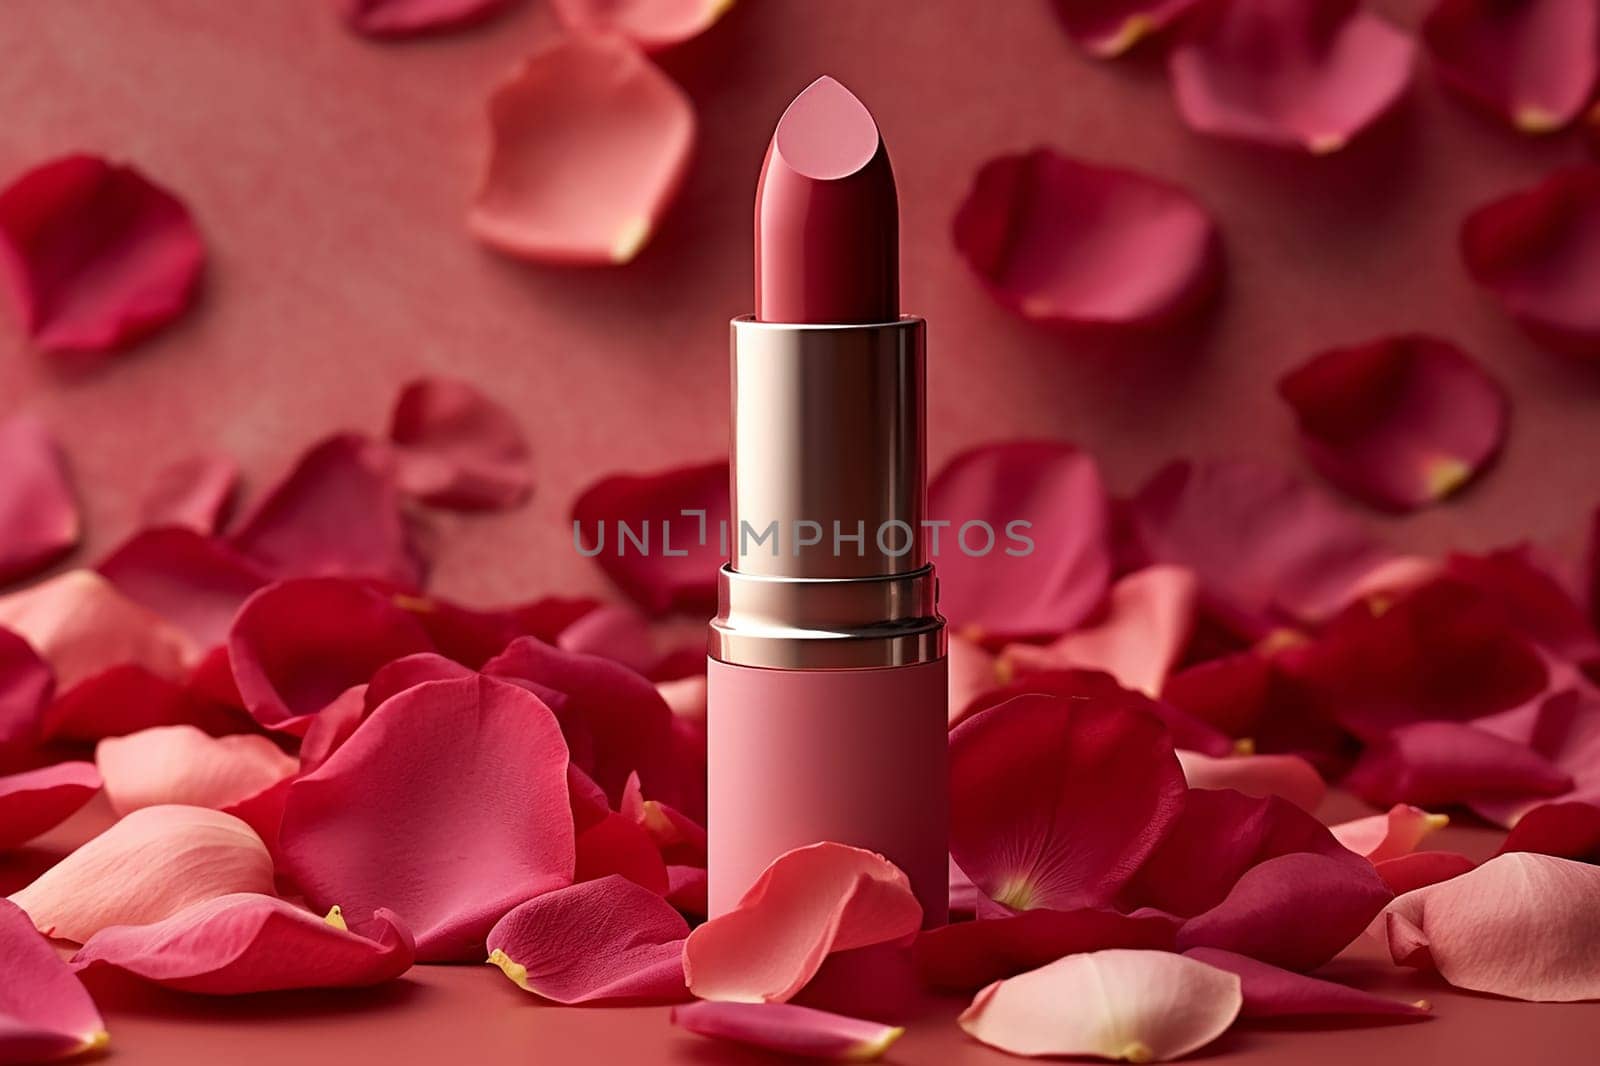 Elegant lipstick surrounded by scattered rose petals by Hype2art